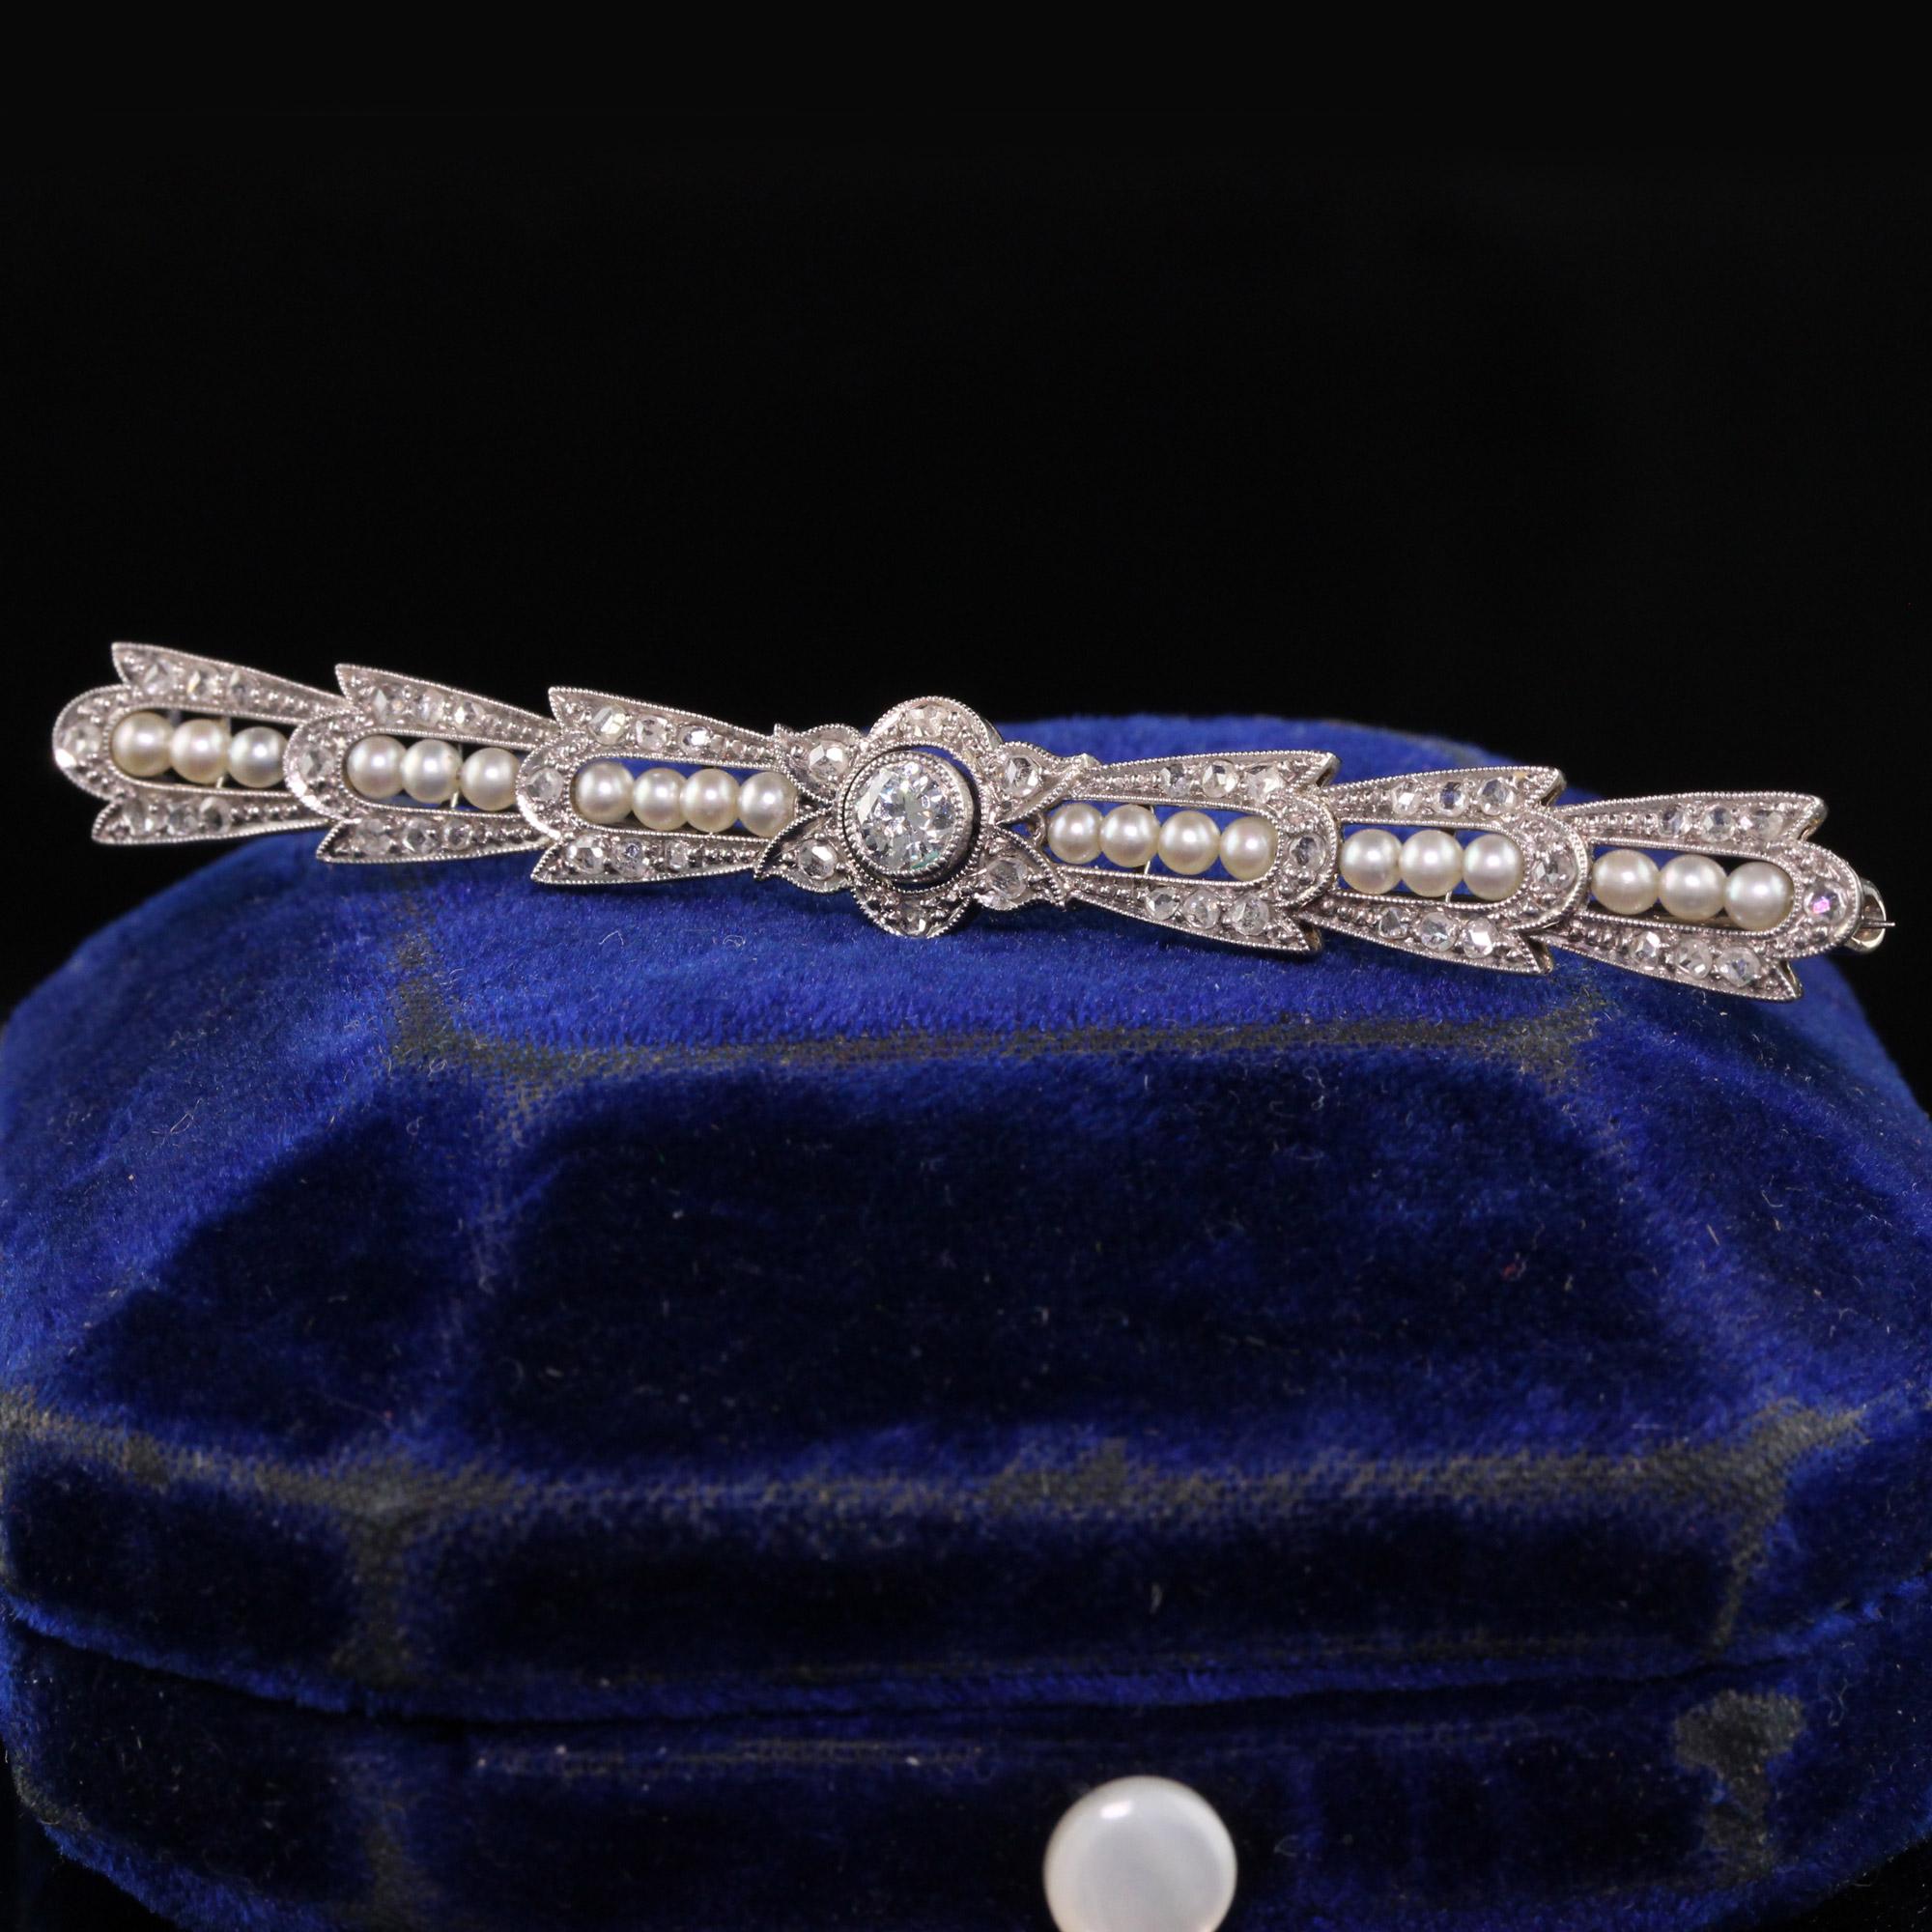 Beautiful Antique Art Deco 18K White Gold Old European Diamond Rose Cut Pearl Pin. This incredible pin has rose cuts set in a beautiful design with a bright old european cut diamond in the center. The pin also has natural seed pearls and is in